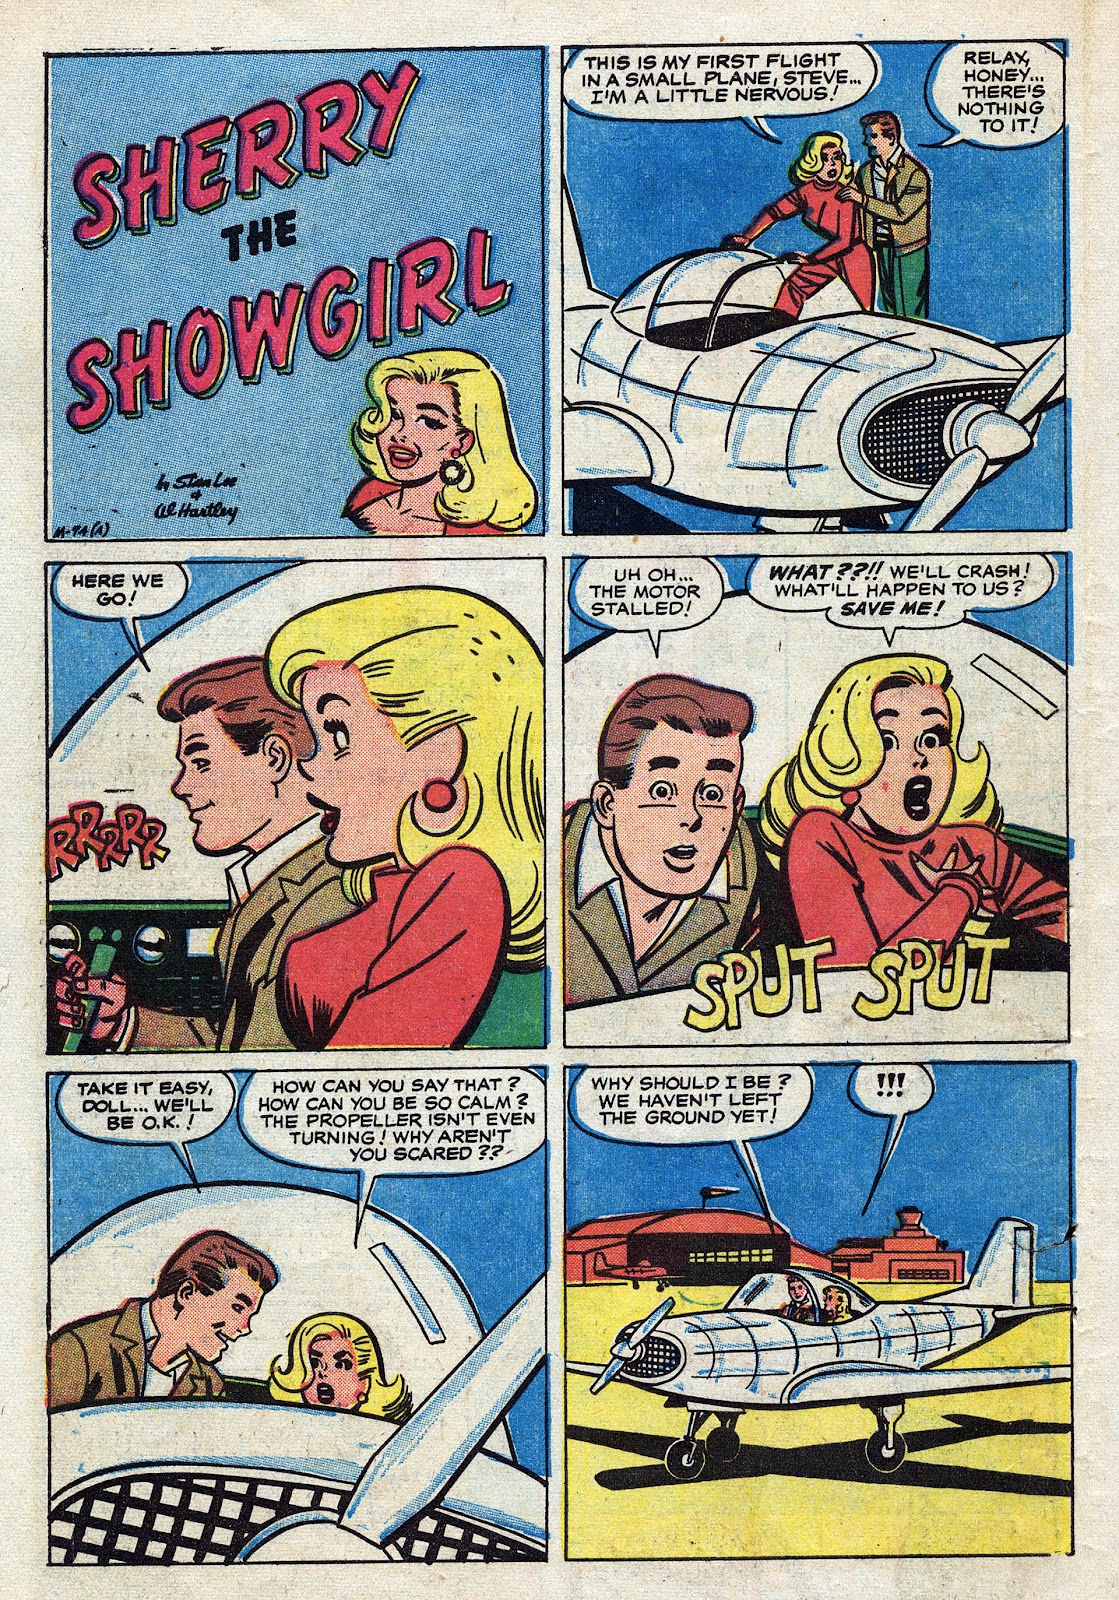 Sherry the Showgirl (1957) issue 6 - Page 11